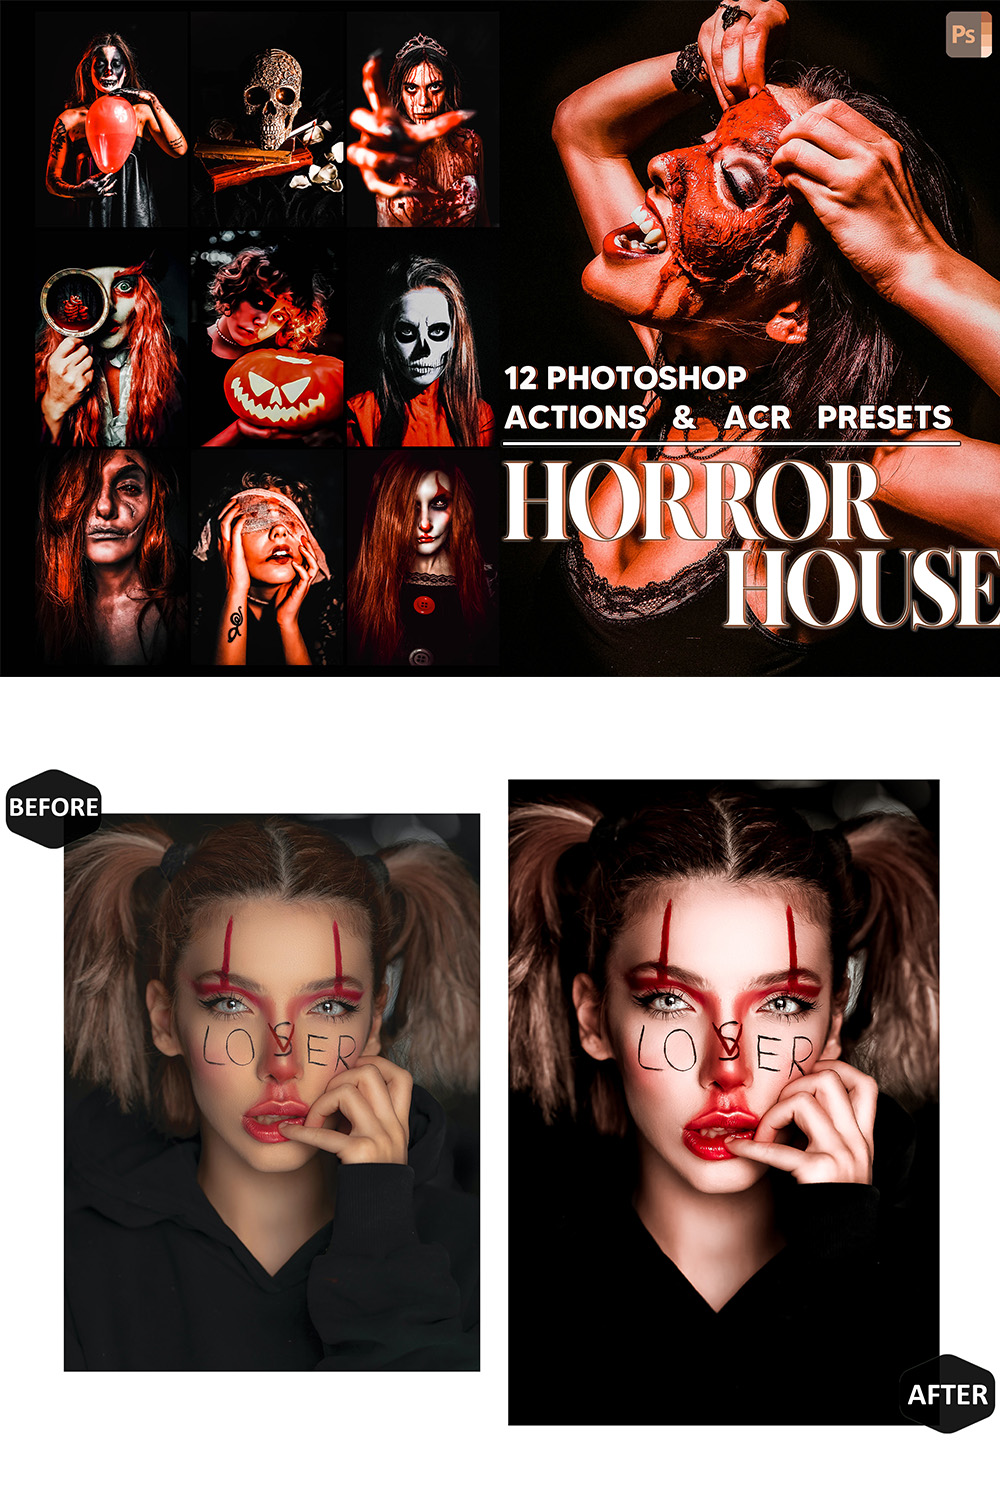 12 Photoshop Actions, Horror House Ps Action, Night ACR Preset, Glamour Ps Filter, Atn Portrait And Lifestyle Theme For Instagram, Blogger pinterest preview image.